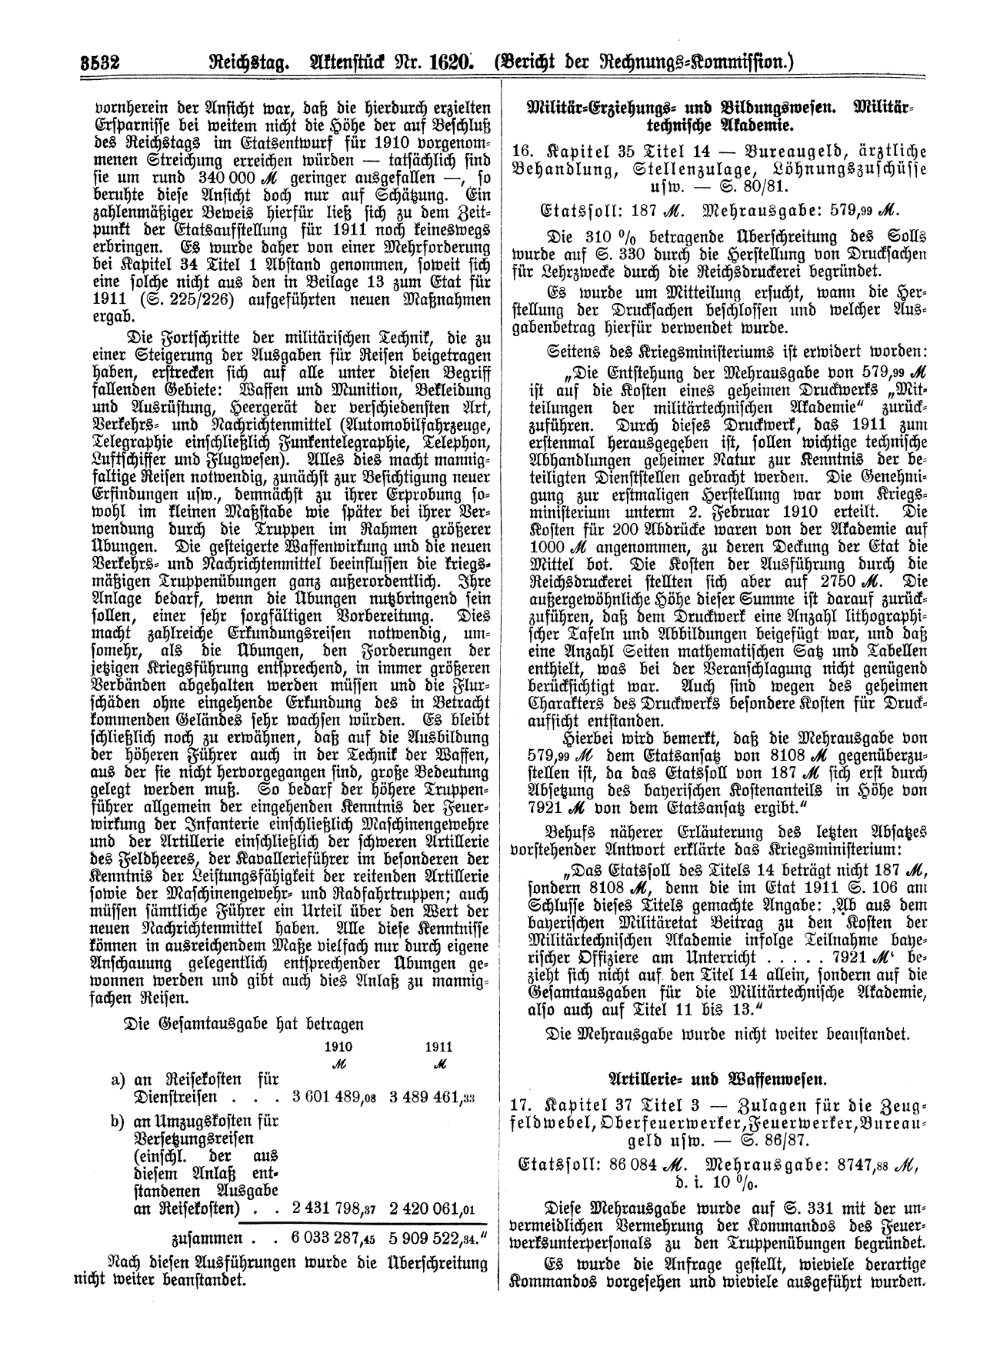 Scan of page 3532